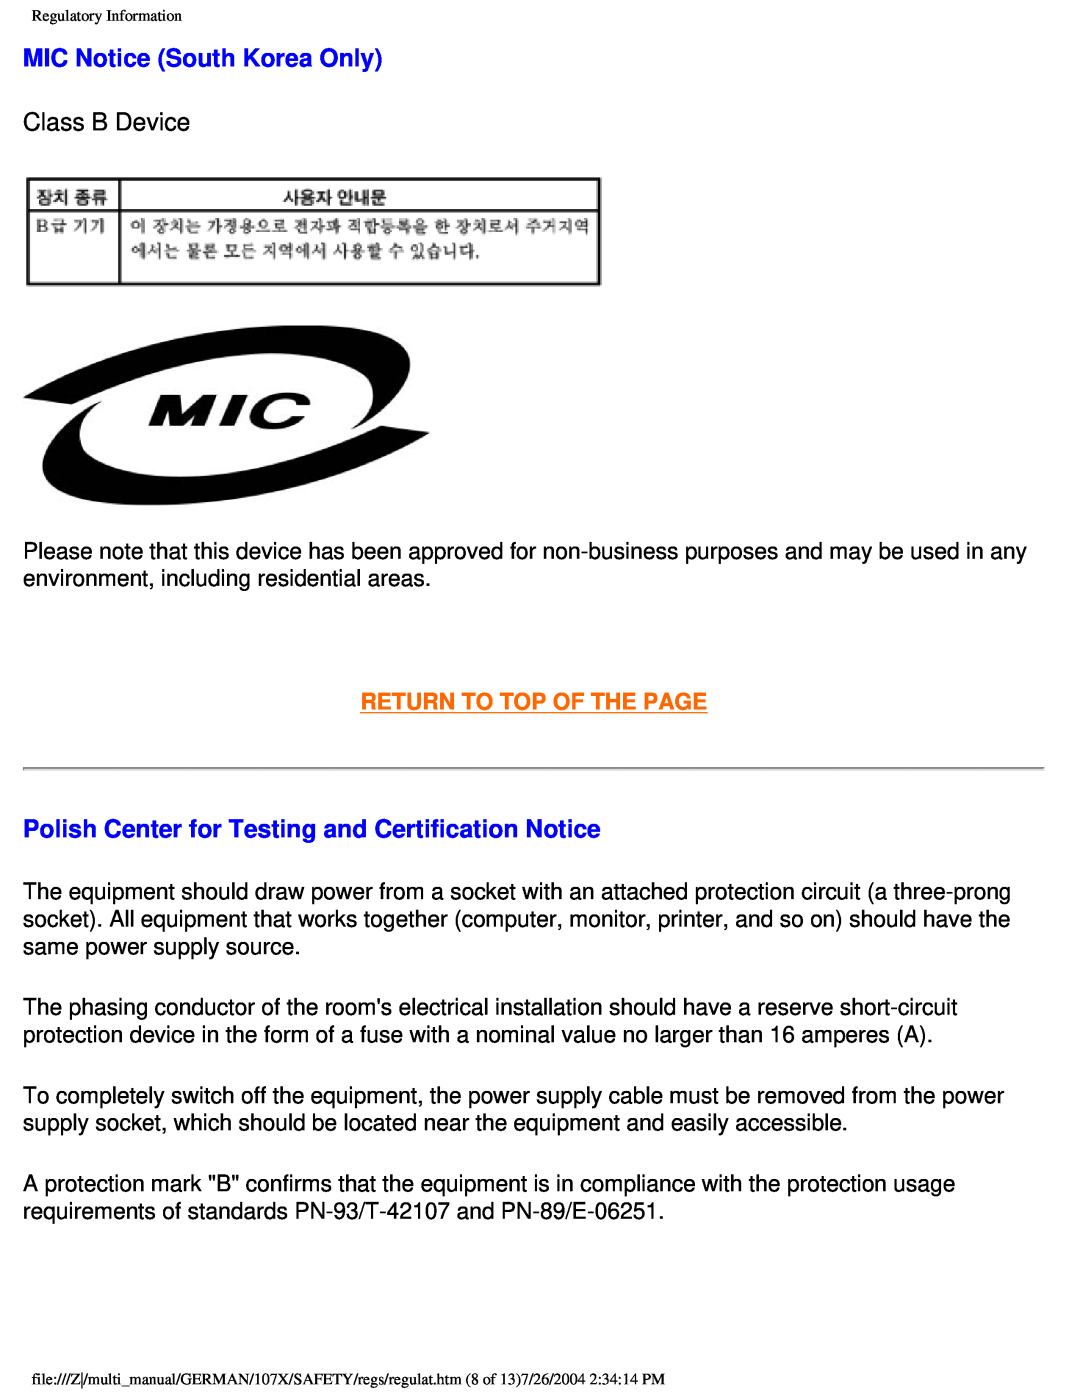 Philips 107X2 user manual MIC Notice South Korea Only, Polish Center for Testing and Certification Notice, Class B Device 